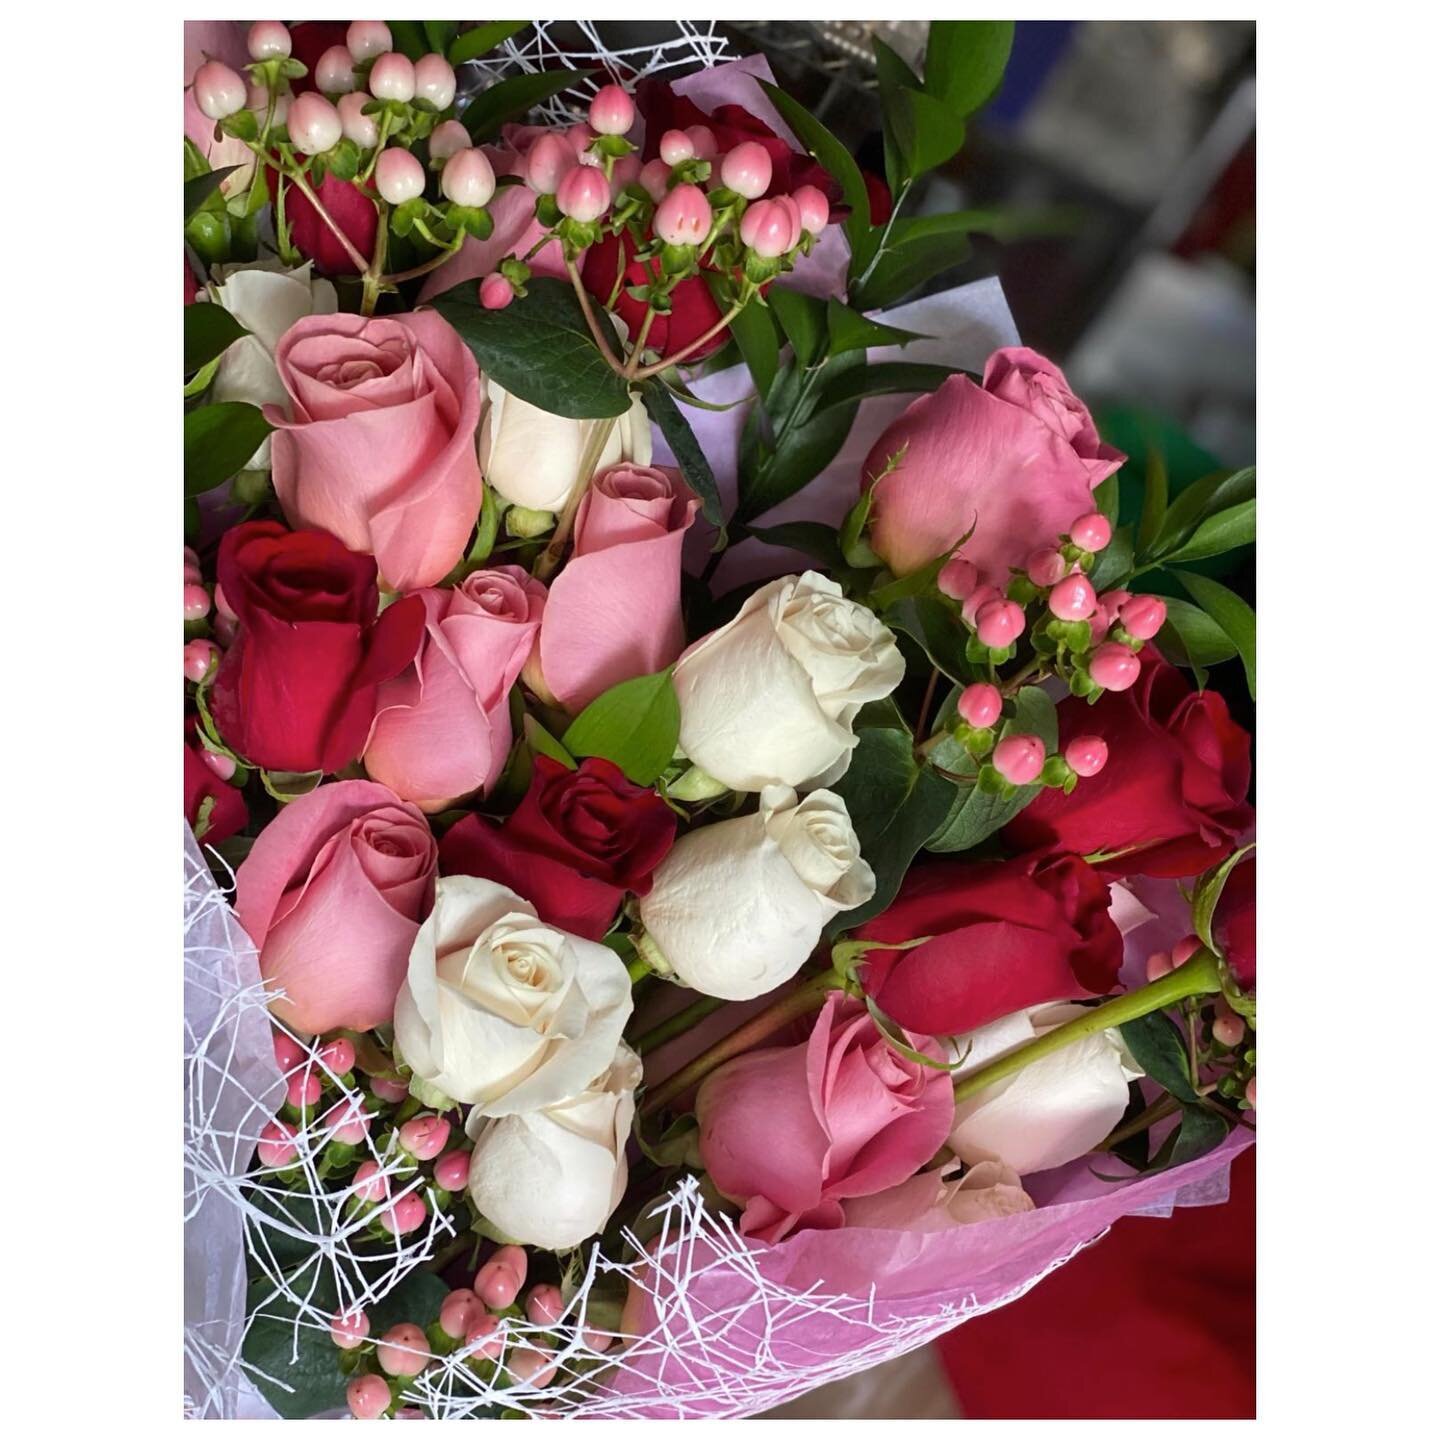 This Sunday is Valentine&rsquo;s Day! 💕
.
Don&rsquo;t Forget, Schedule Your Flowers for Curbside Pick Up or Delivery &hearts;️
. 
S h o p 🌹 O n l i n e . at www.pinkpetals.ca (Click the Link in our Bio!)
.
Please contact Pink Petals at info@pinkpet